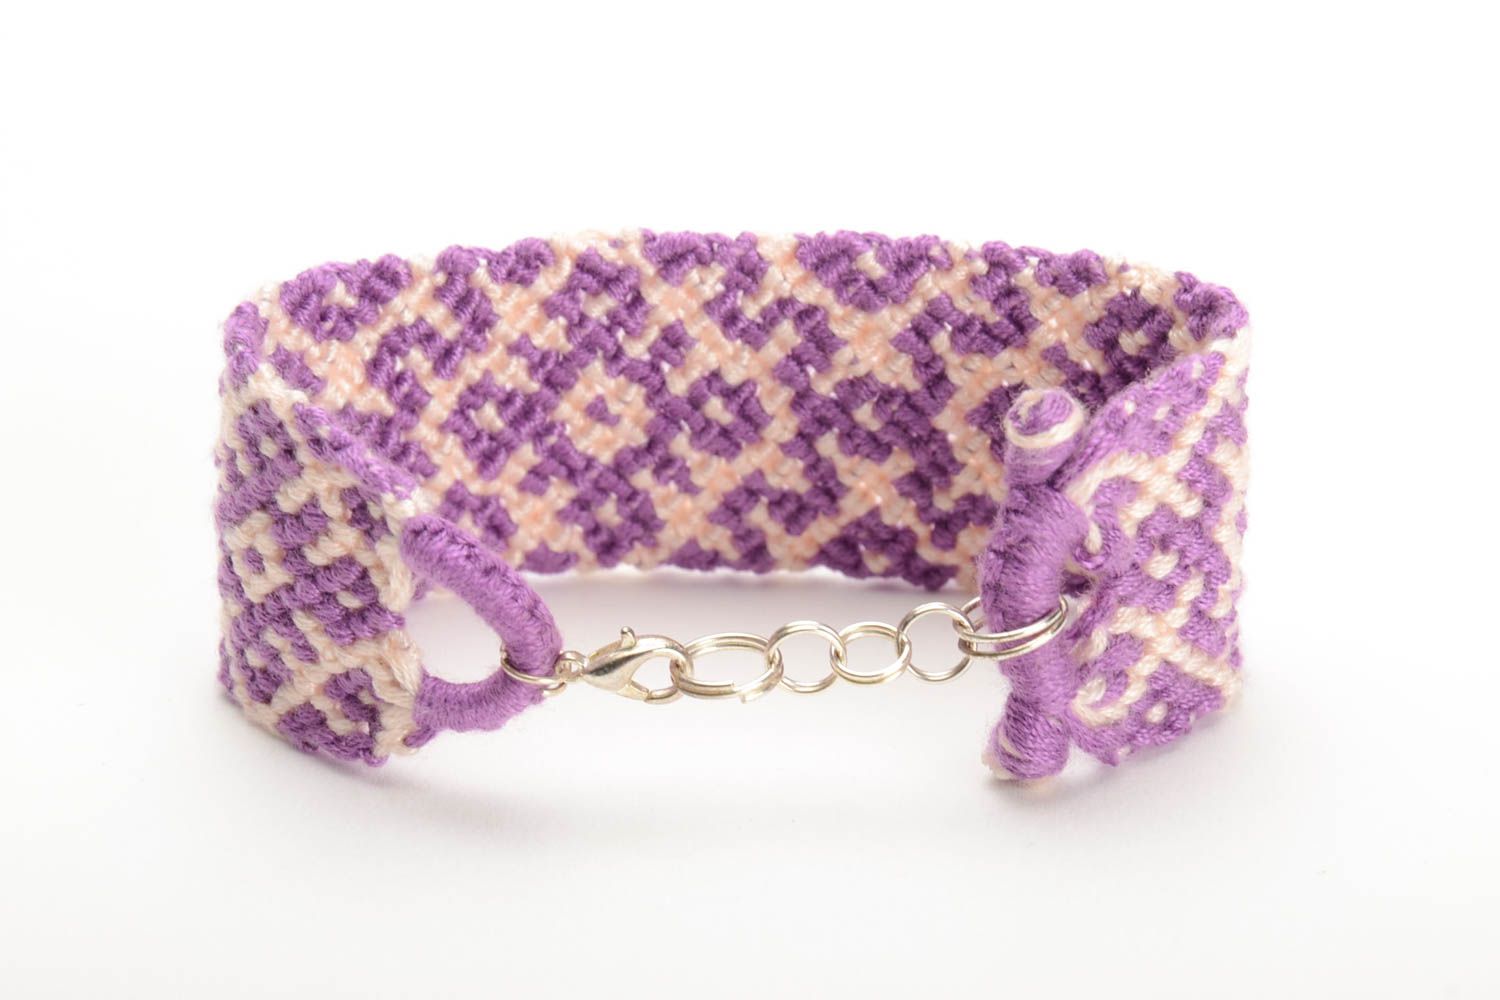 Lilac handmade bright wide wrist bracelet woven of embroidery floss photo 3